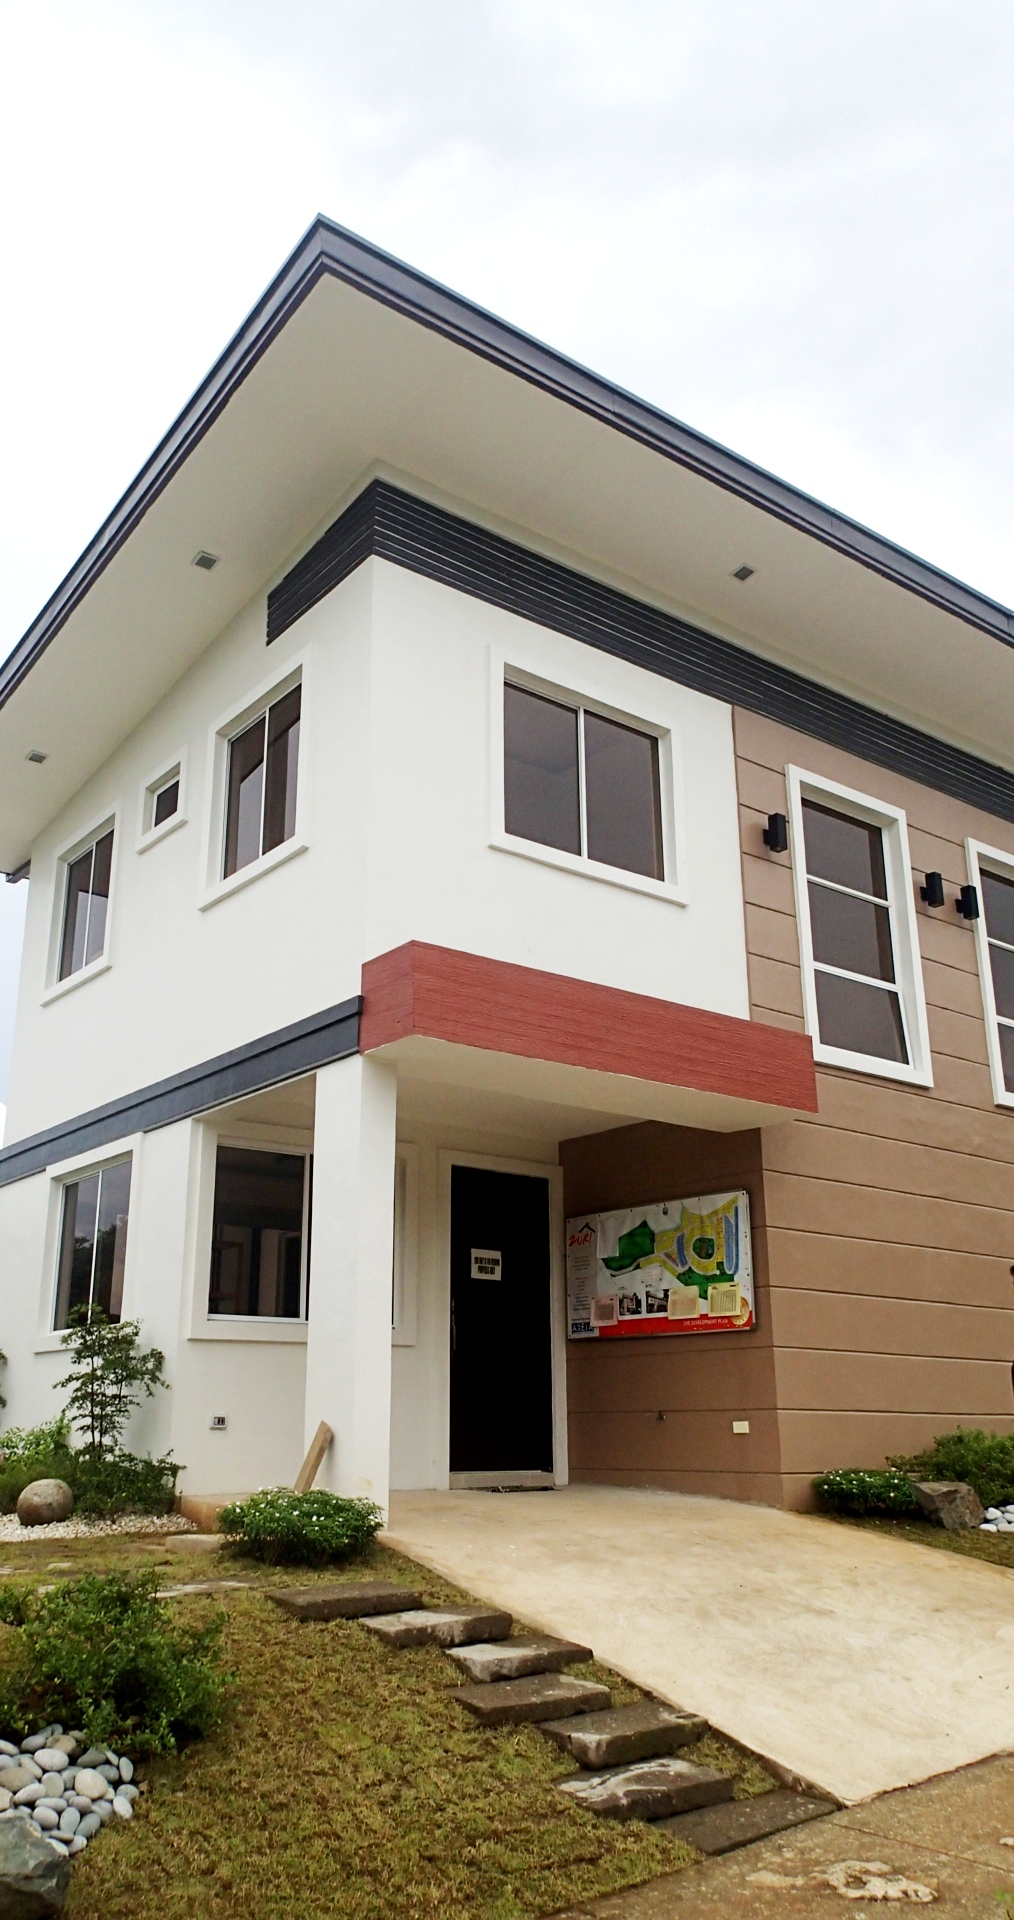 Taytay, Rizal, Townhouse for Sale in Taytay - Zuri Residences, Townhouse for Sale in Taytay - Zuri Residences, Zuri Residences - House for Sale in Taytay - Only 15k per Month, Low monthly investments